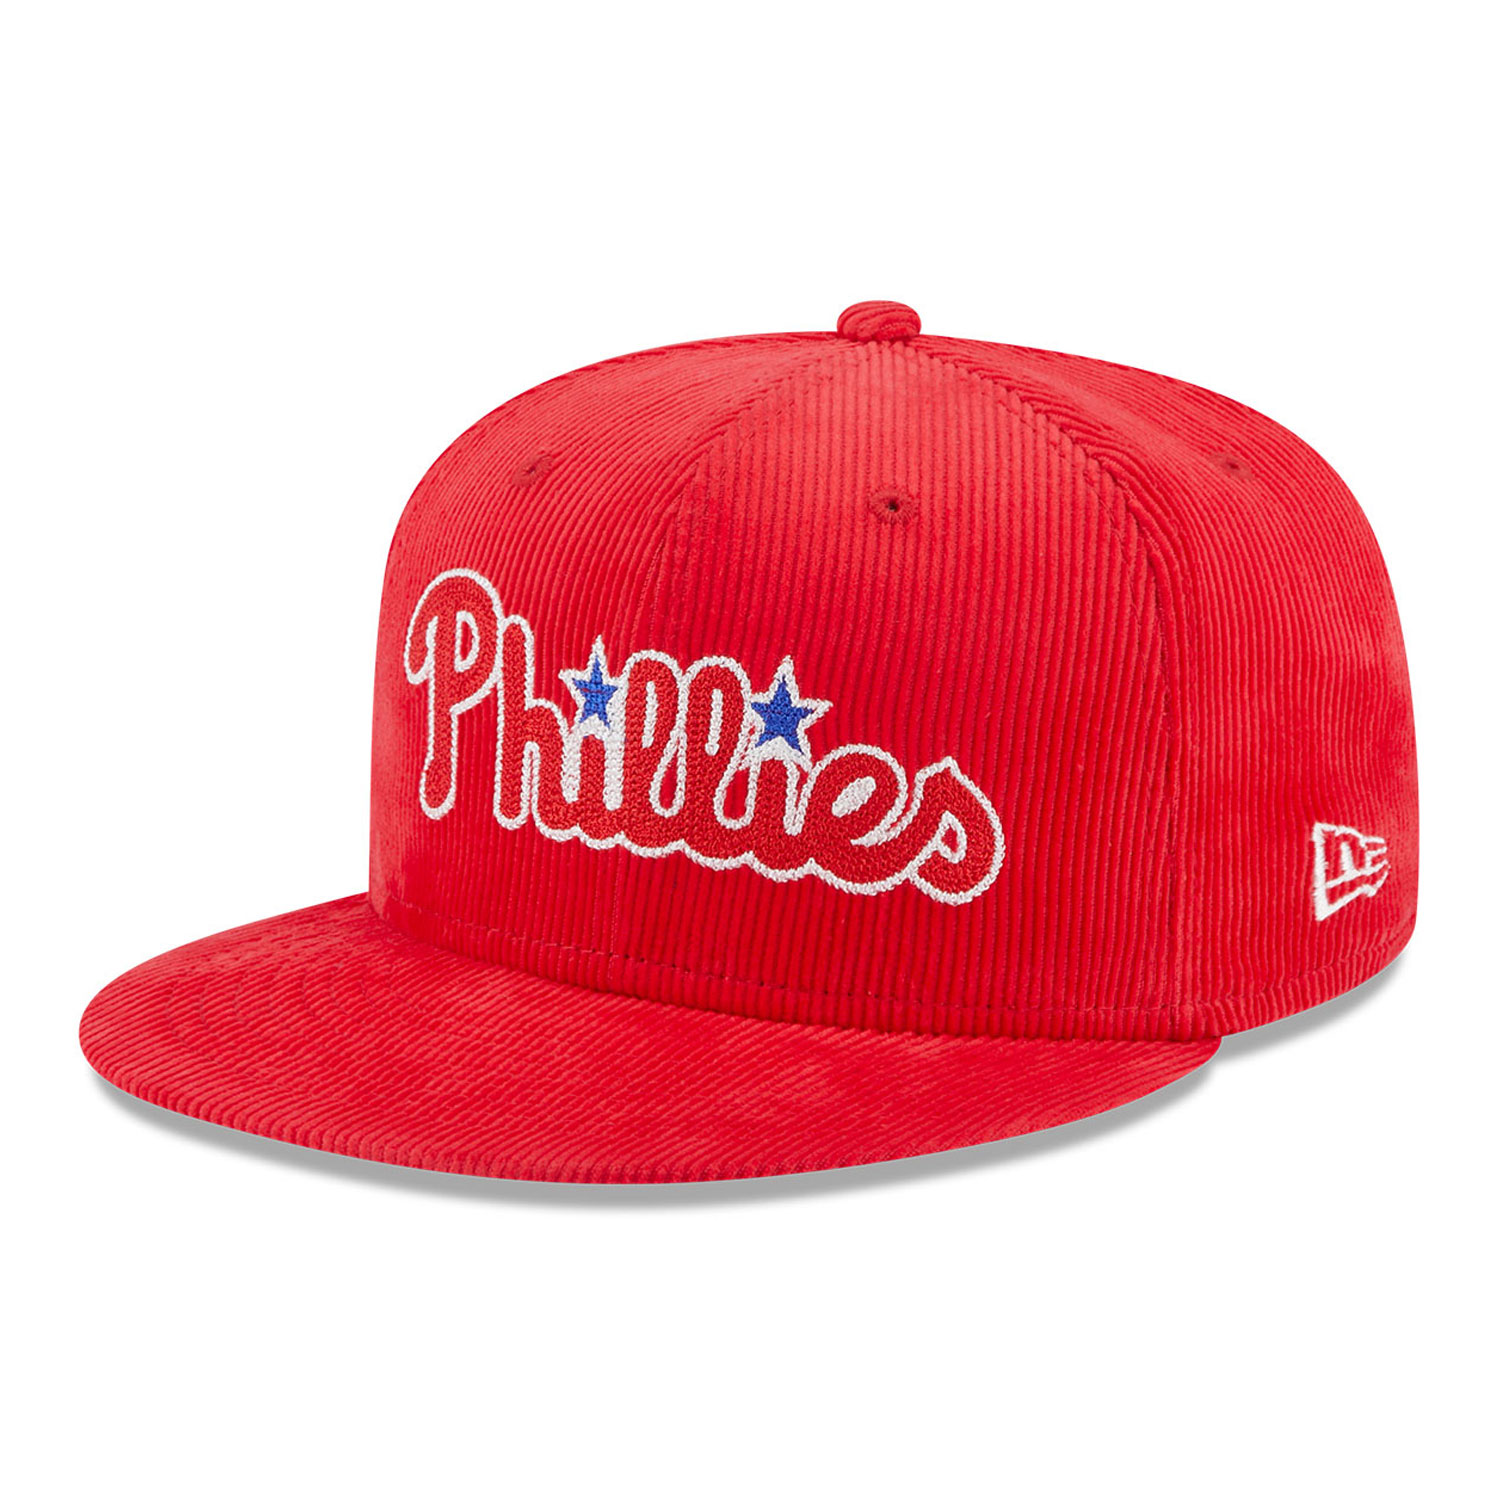 Official New Era Vintage Cord Philadelphia Phillies 59FIFTY Fitted